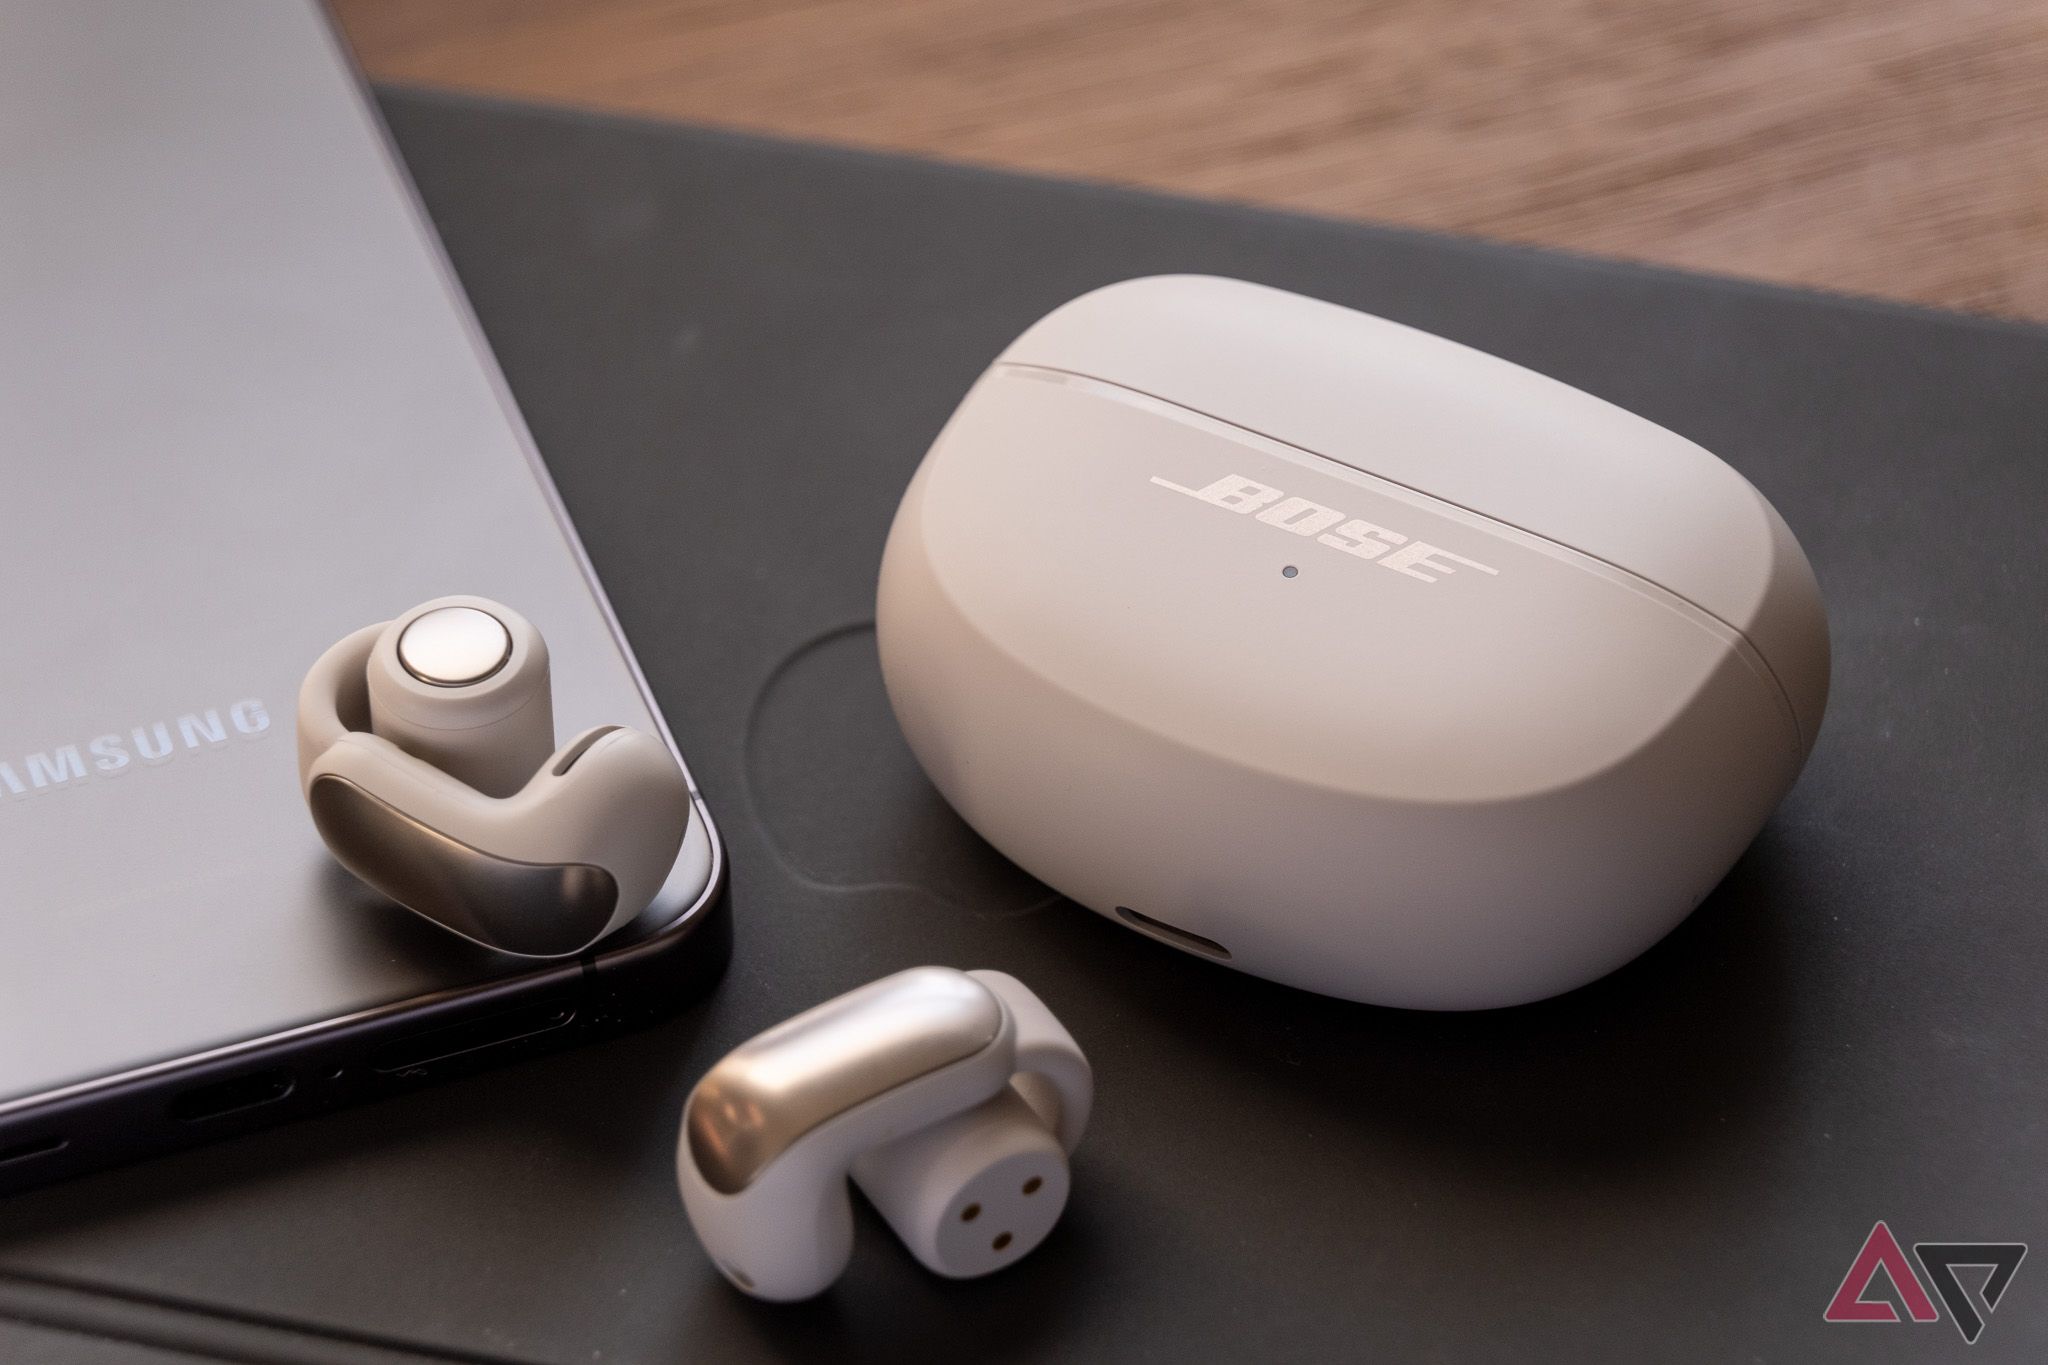 The 10 Best Headphone And Earbud Brands - Spring 2024: Reviews 